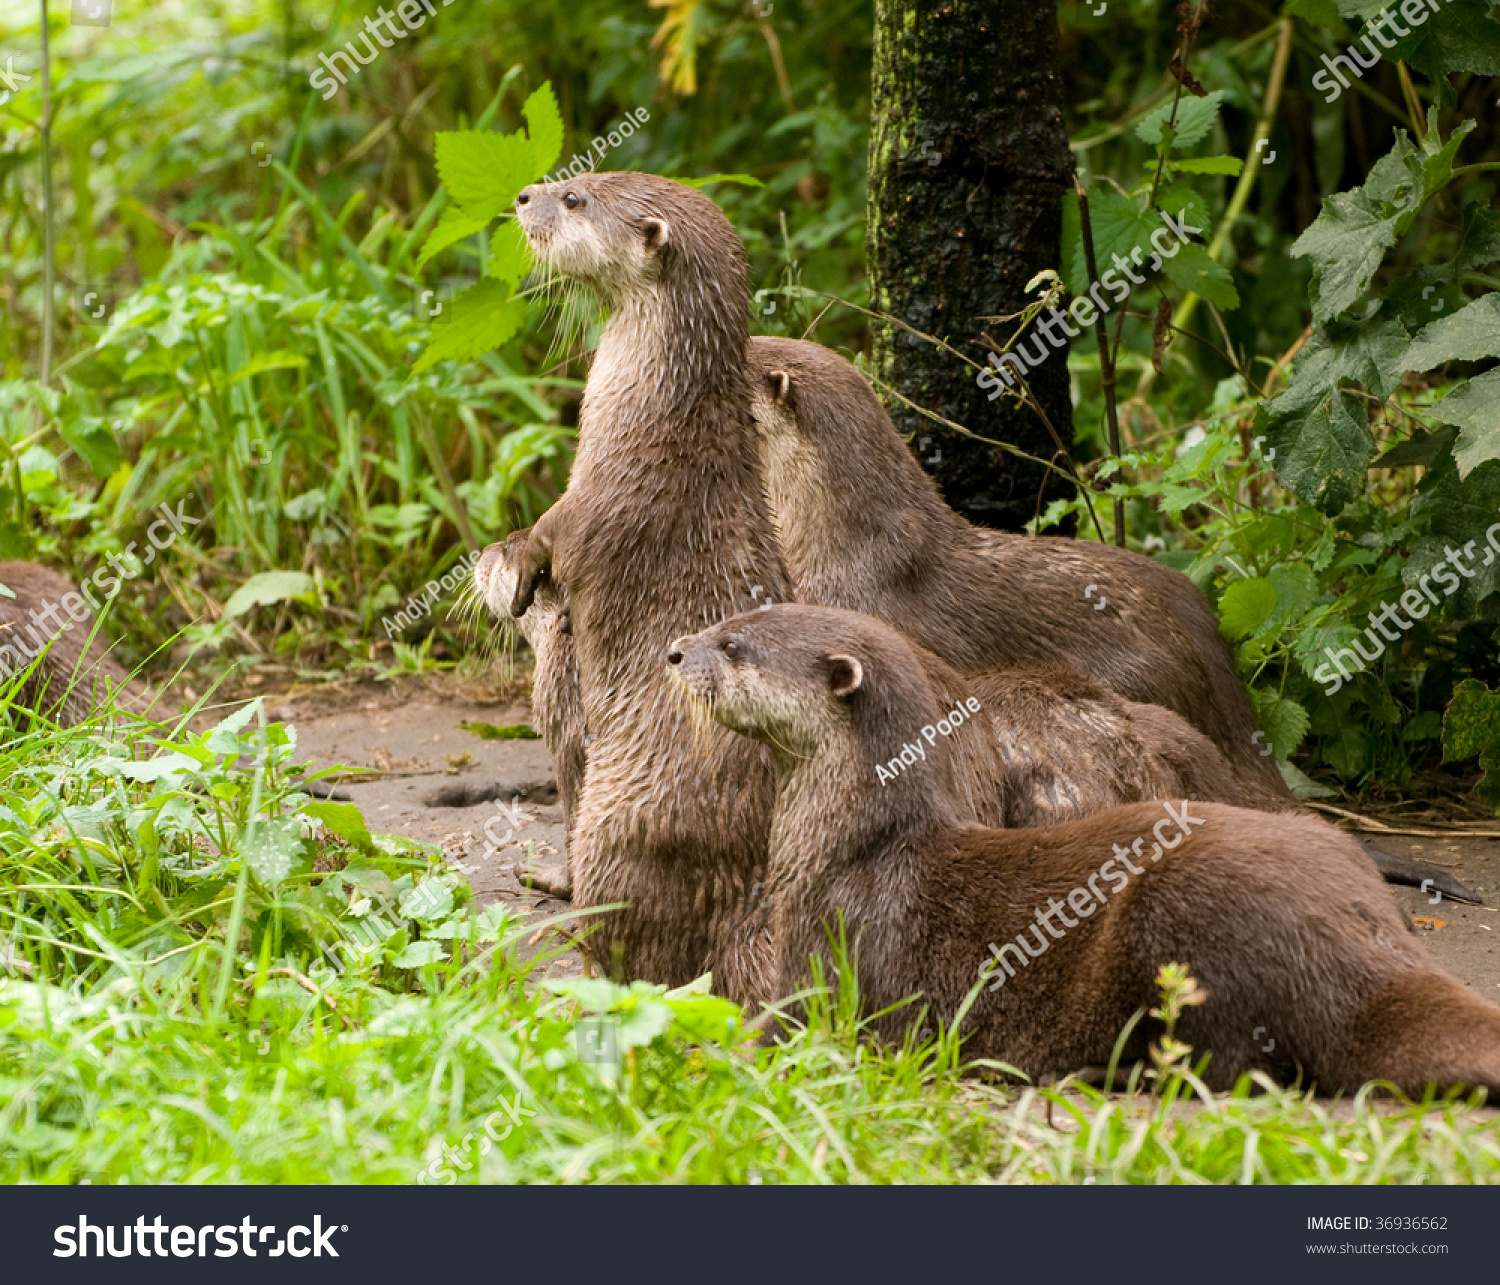 Group Of Otters 73